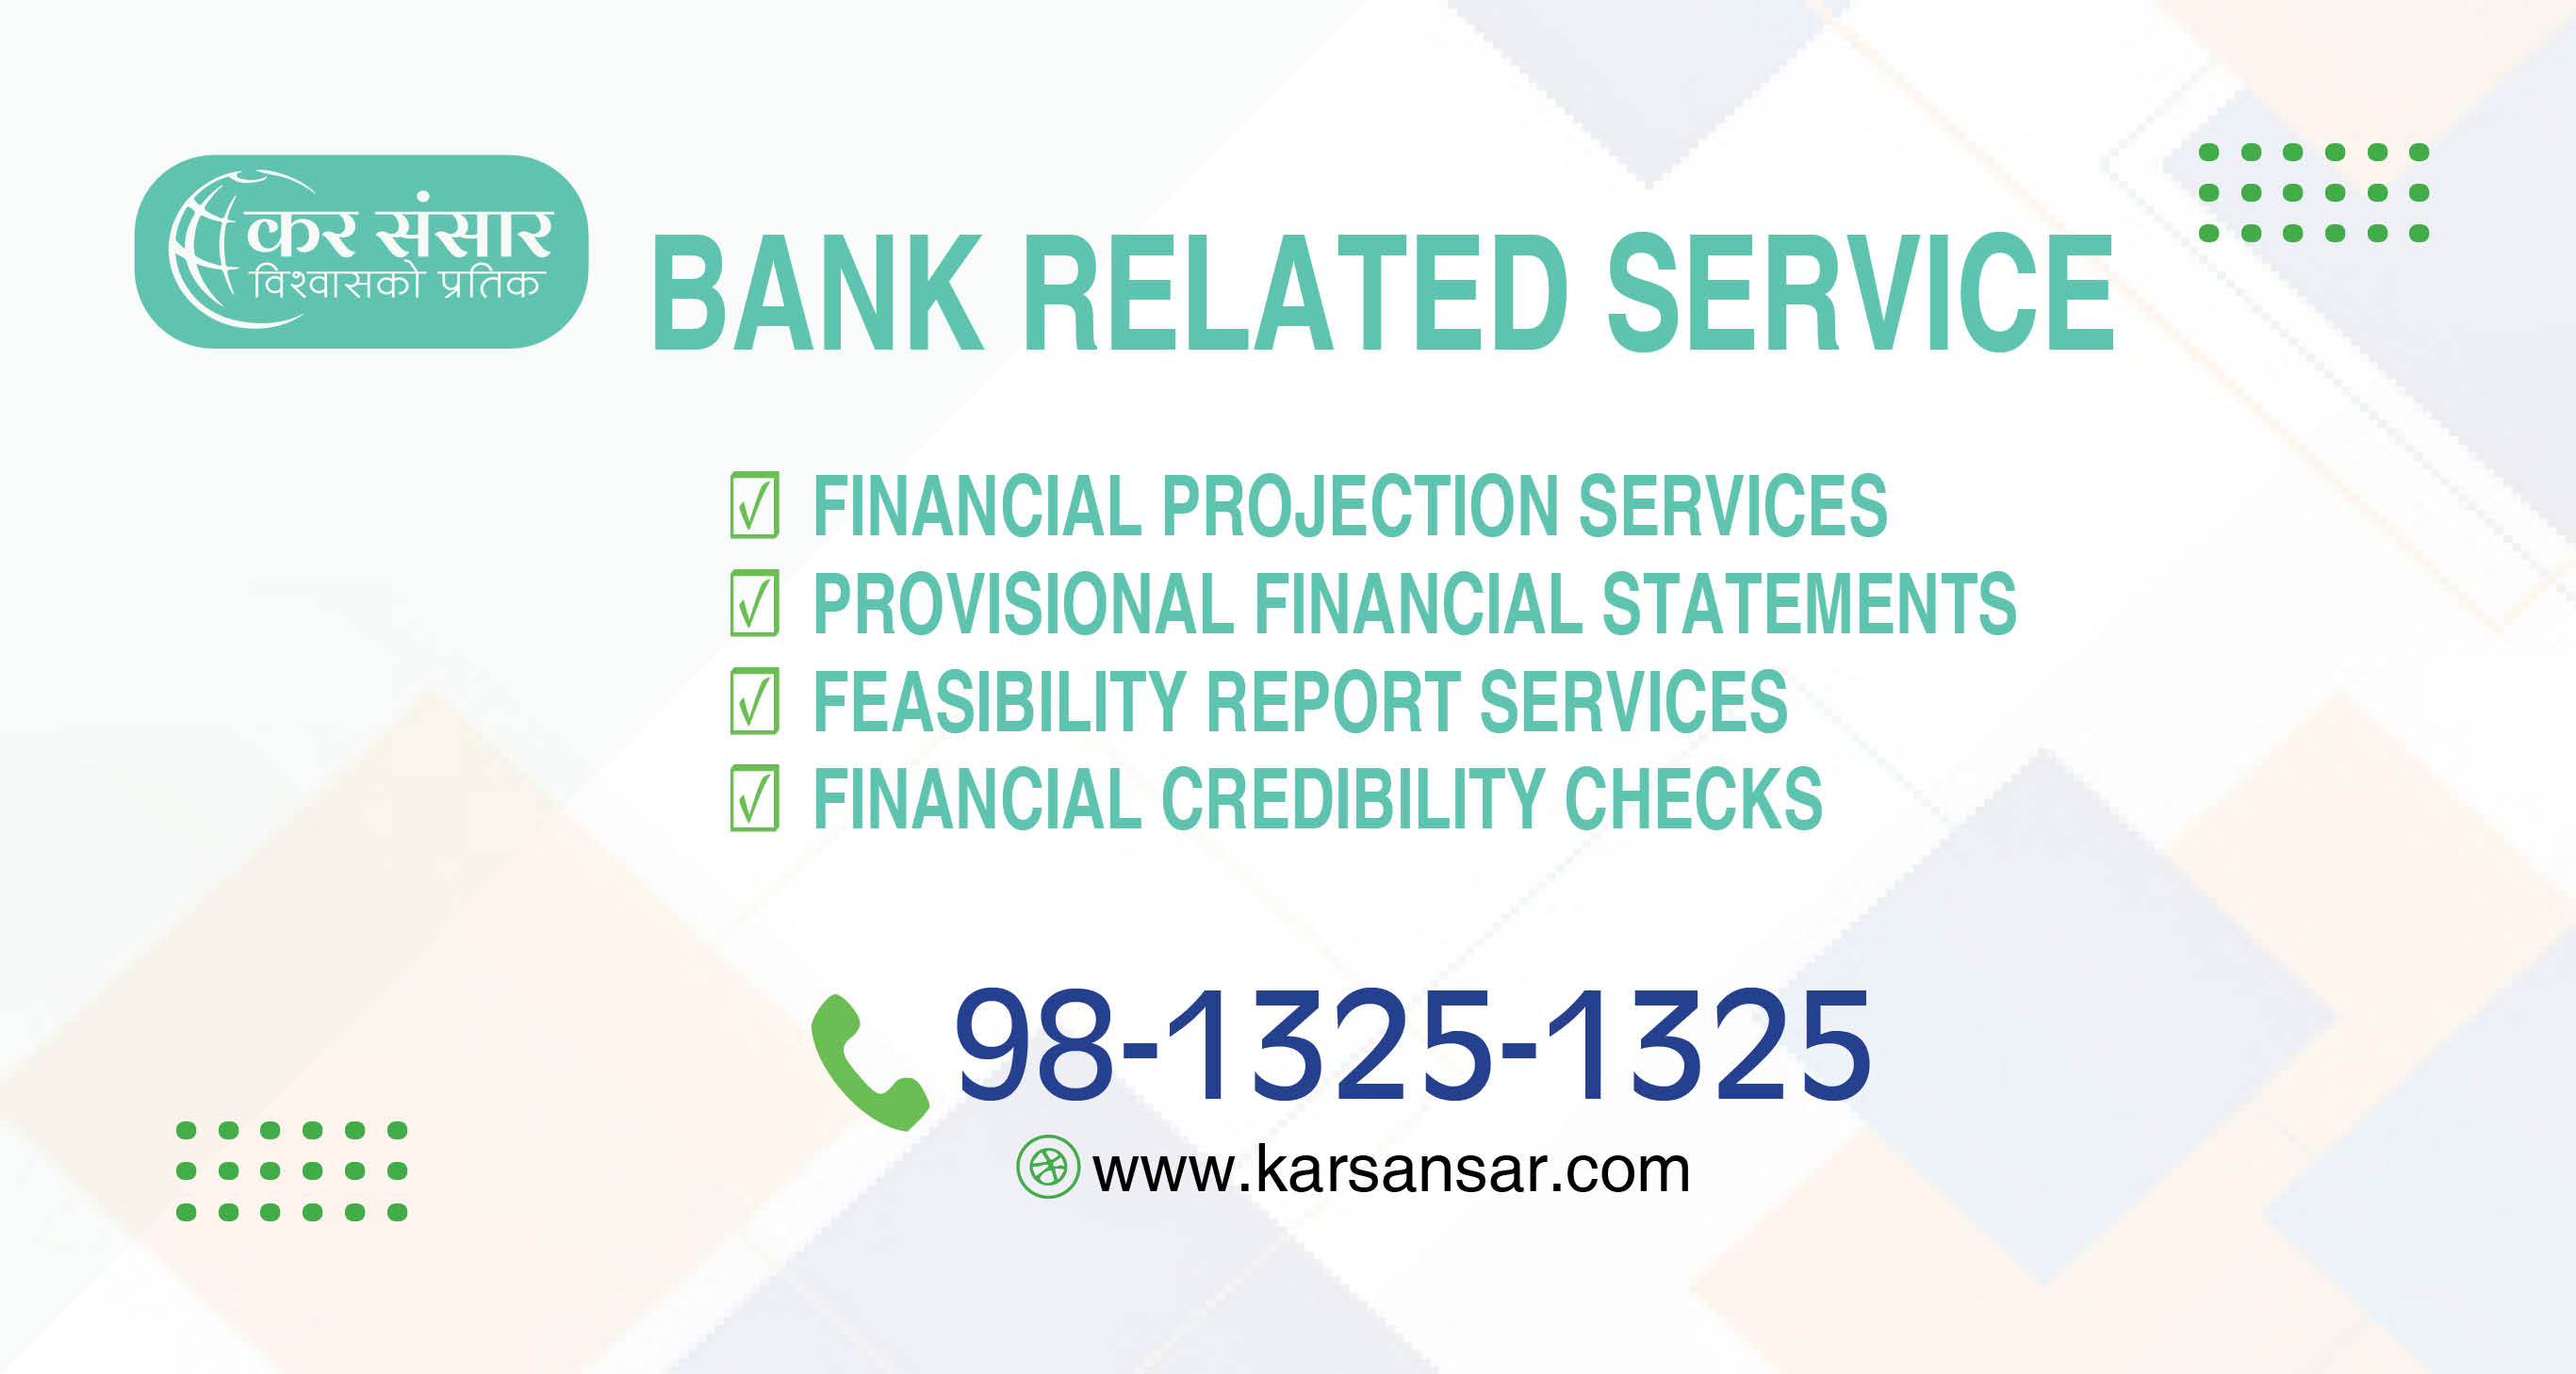 BANK RELATED SERVICE